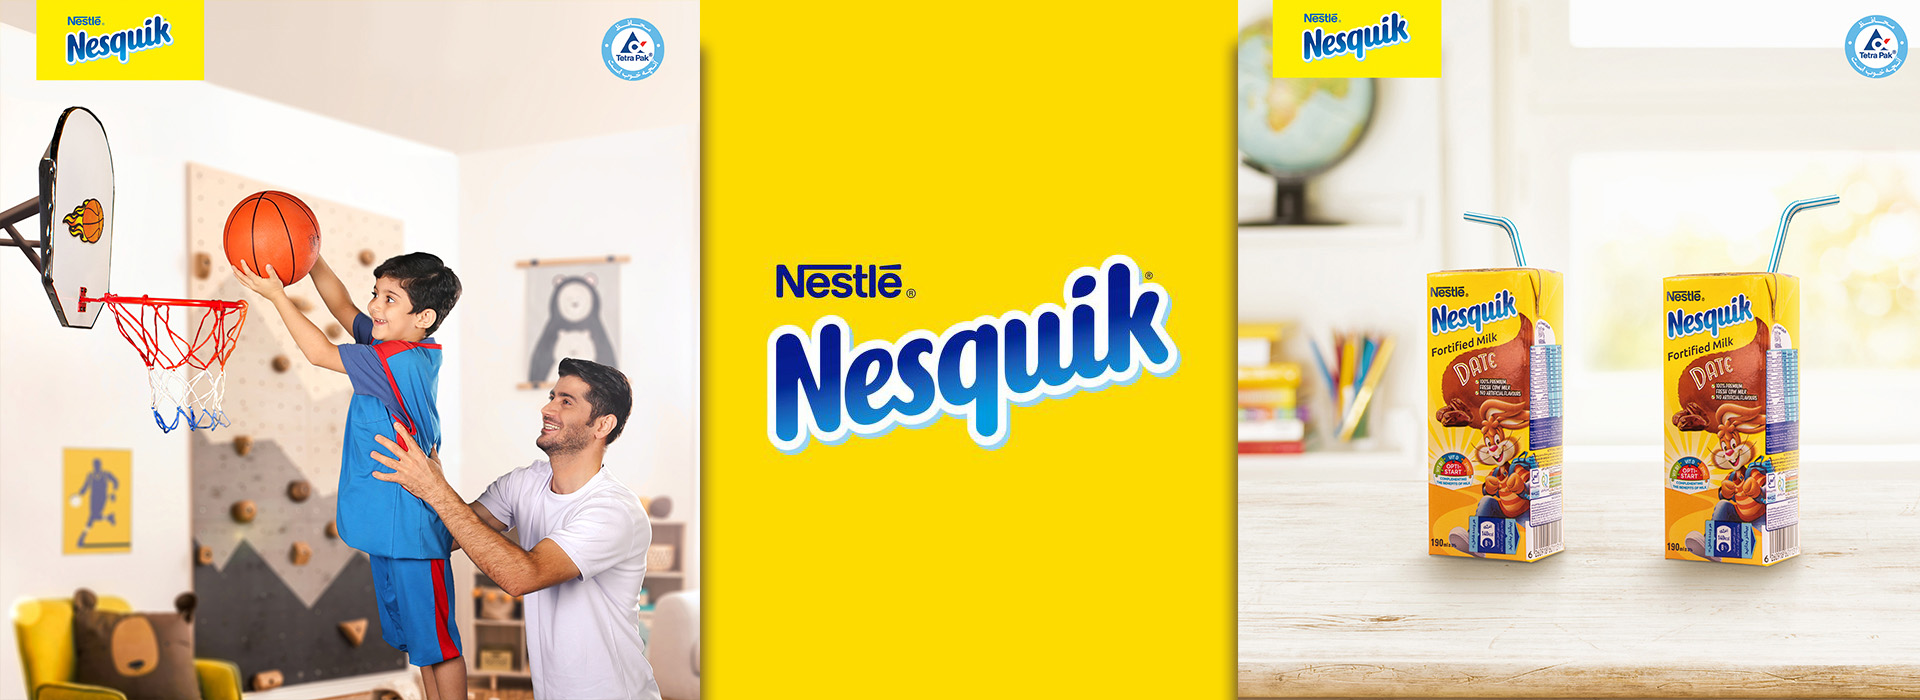 Nesquik logo, drinks and a father and child playing basketball